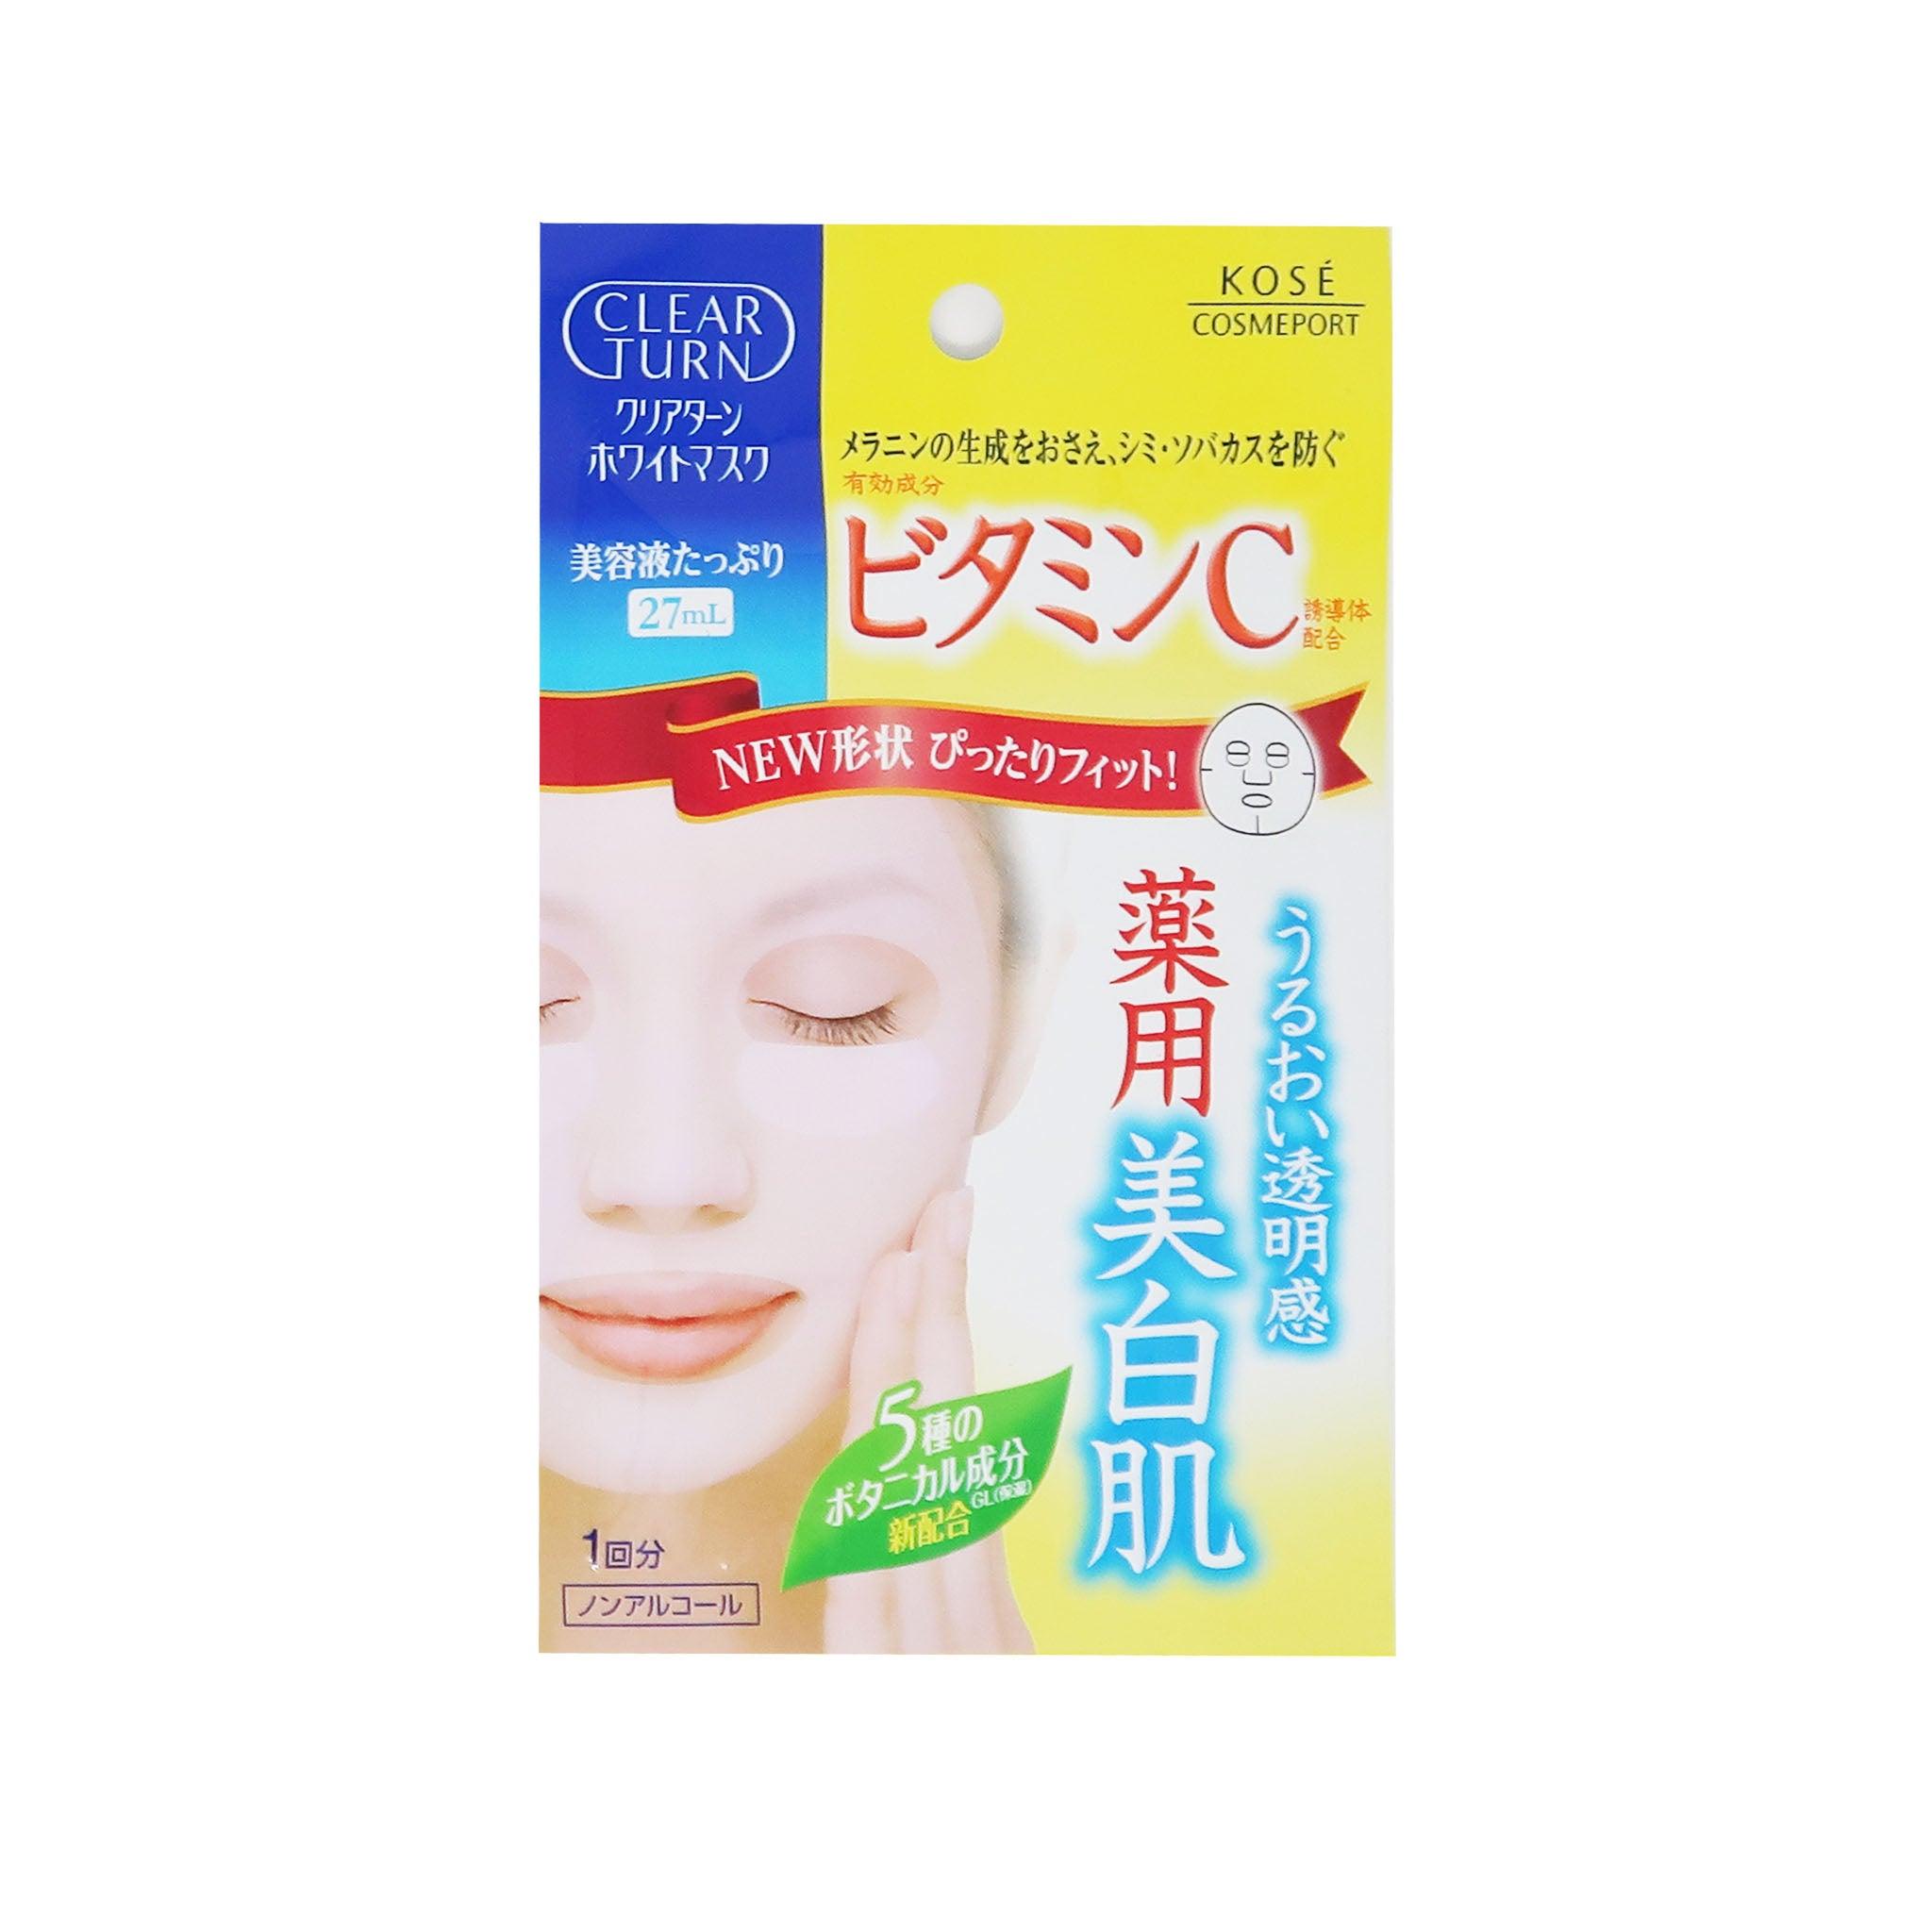 KOSE COSMEPORT Clear Turn White Mask - Vitamin C [1PC]